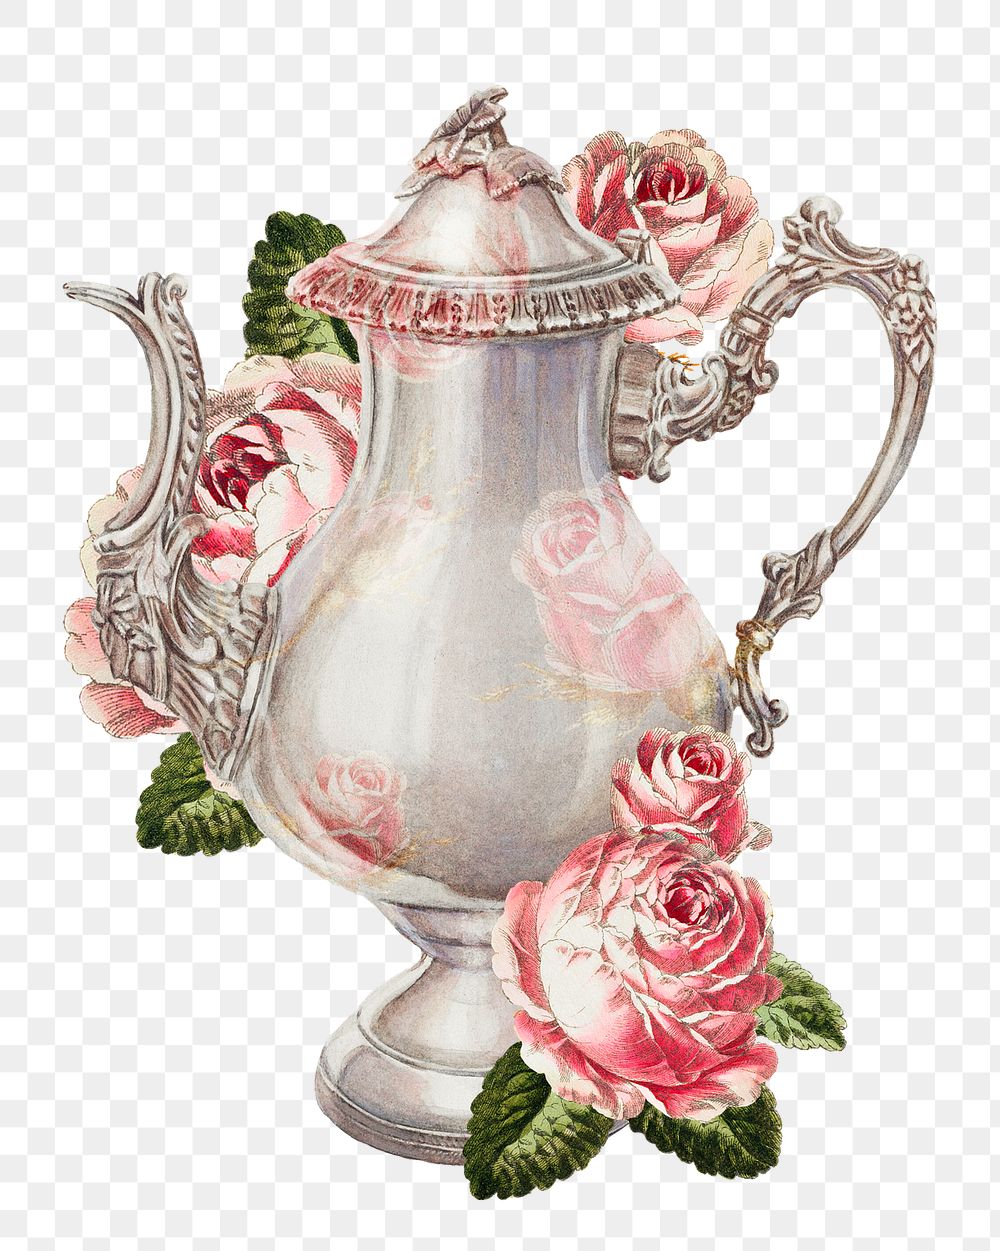 Vintage coffee pot png with flower illustration, remixed from the artwork by Ernest A. Towers, Jr.